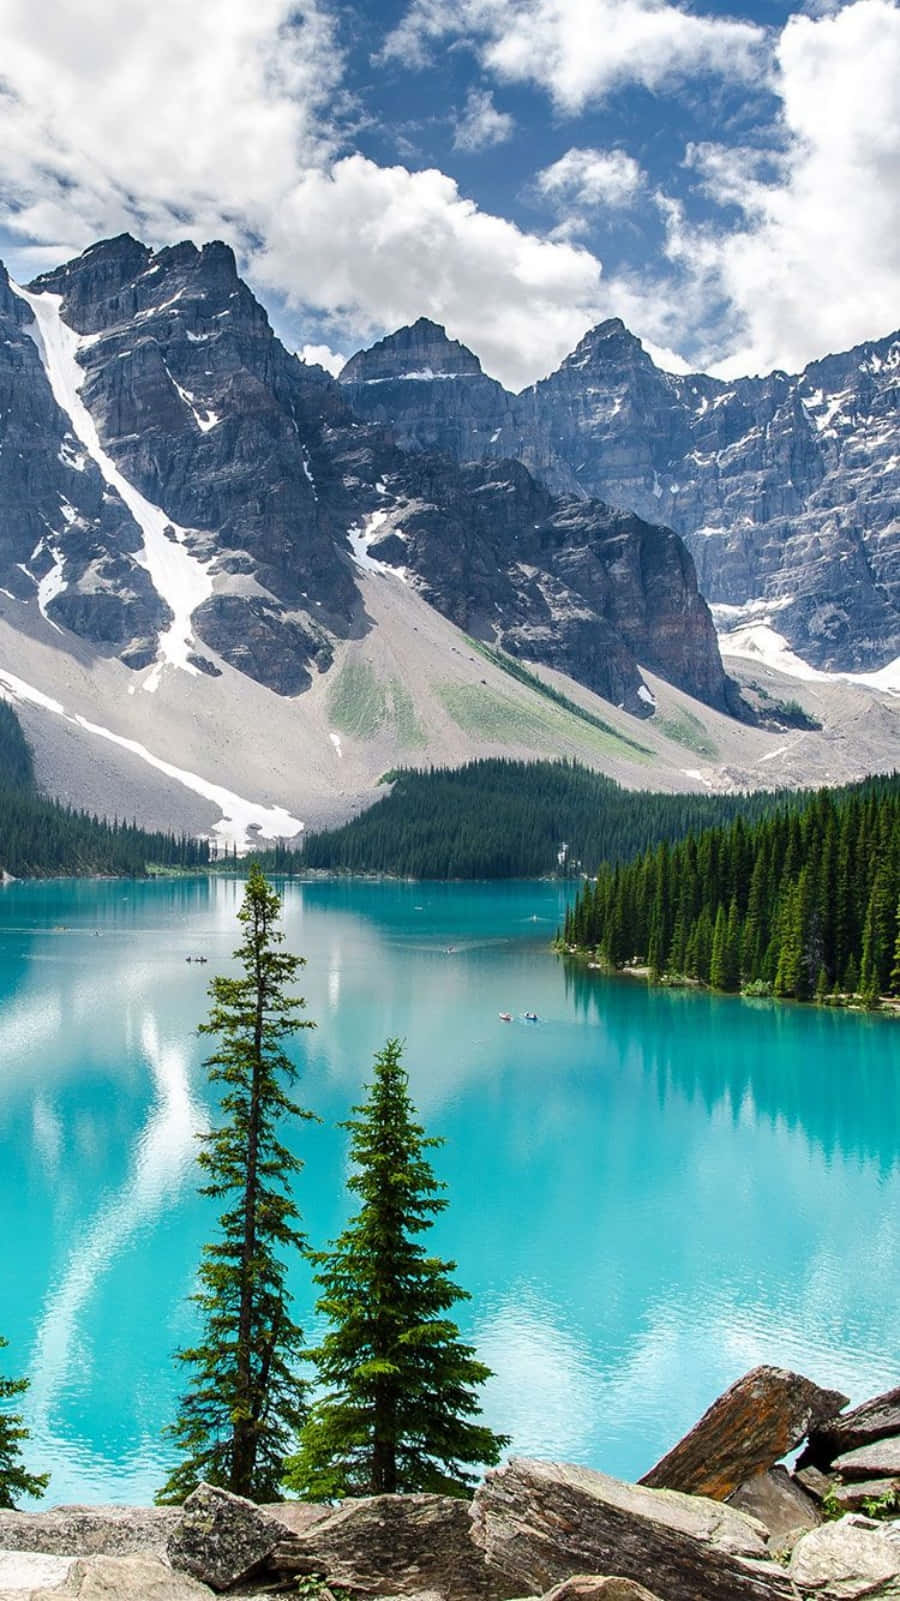 National Parks and Nature Scenes Mobile Wallpapers on Tumblr